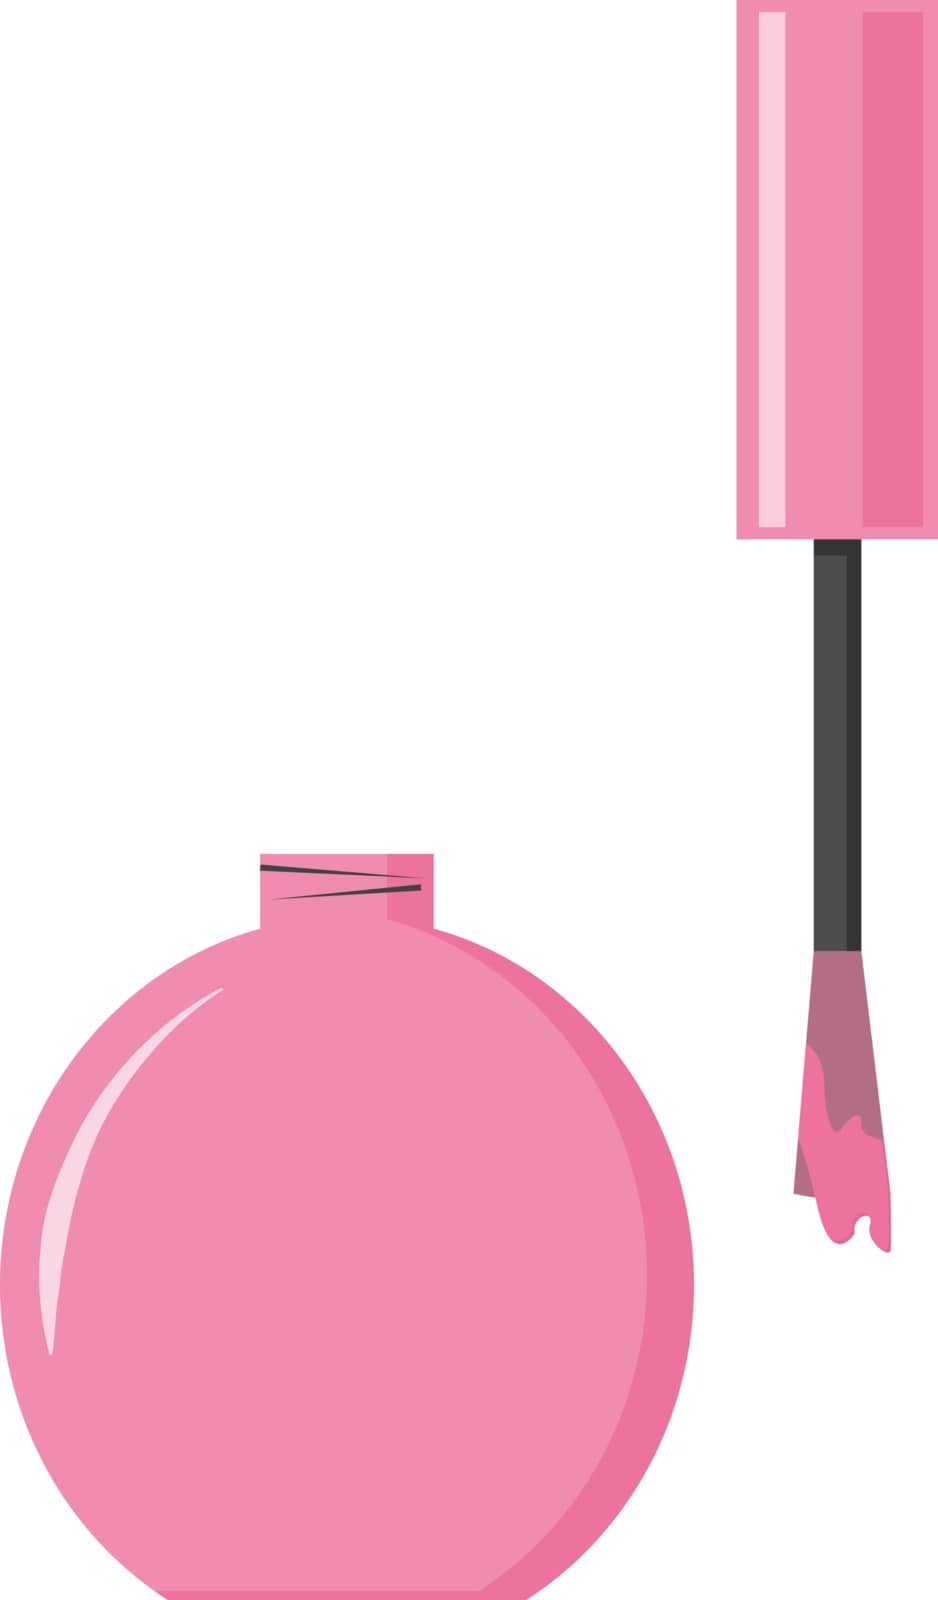 Pink manicure, illustration, vector on white background. by Morphart